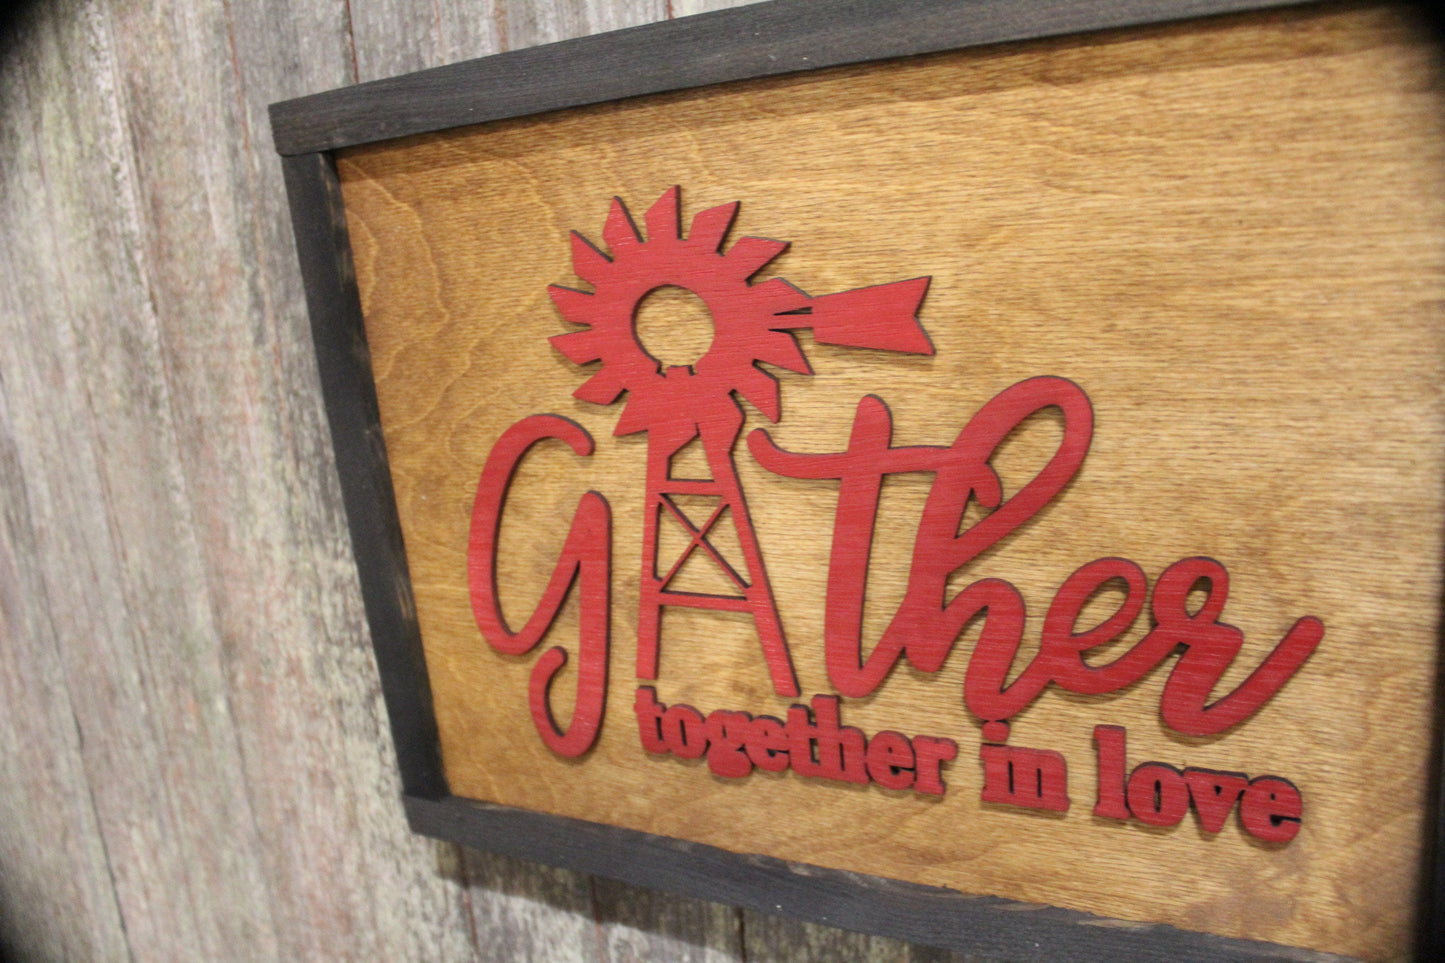 Gather Together In Love Wood Sign 3D Raised Text Windmill Rustic Country Cabin Decoration Wall Art Kitchen Dining Room Red Housewarming